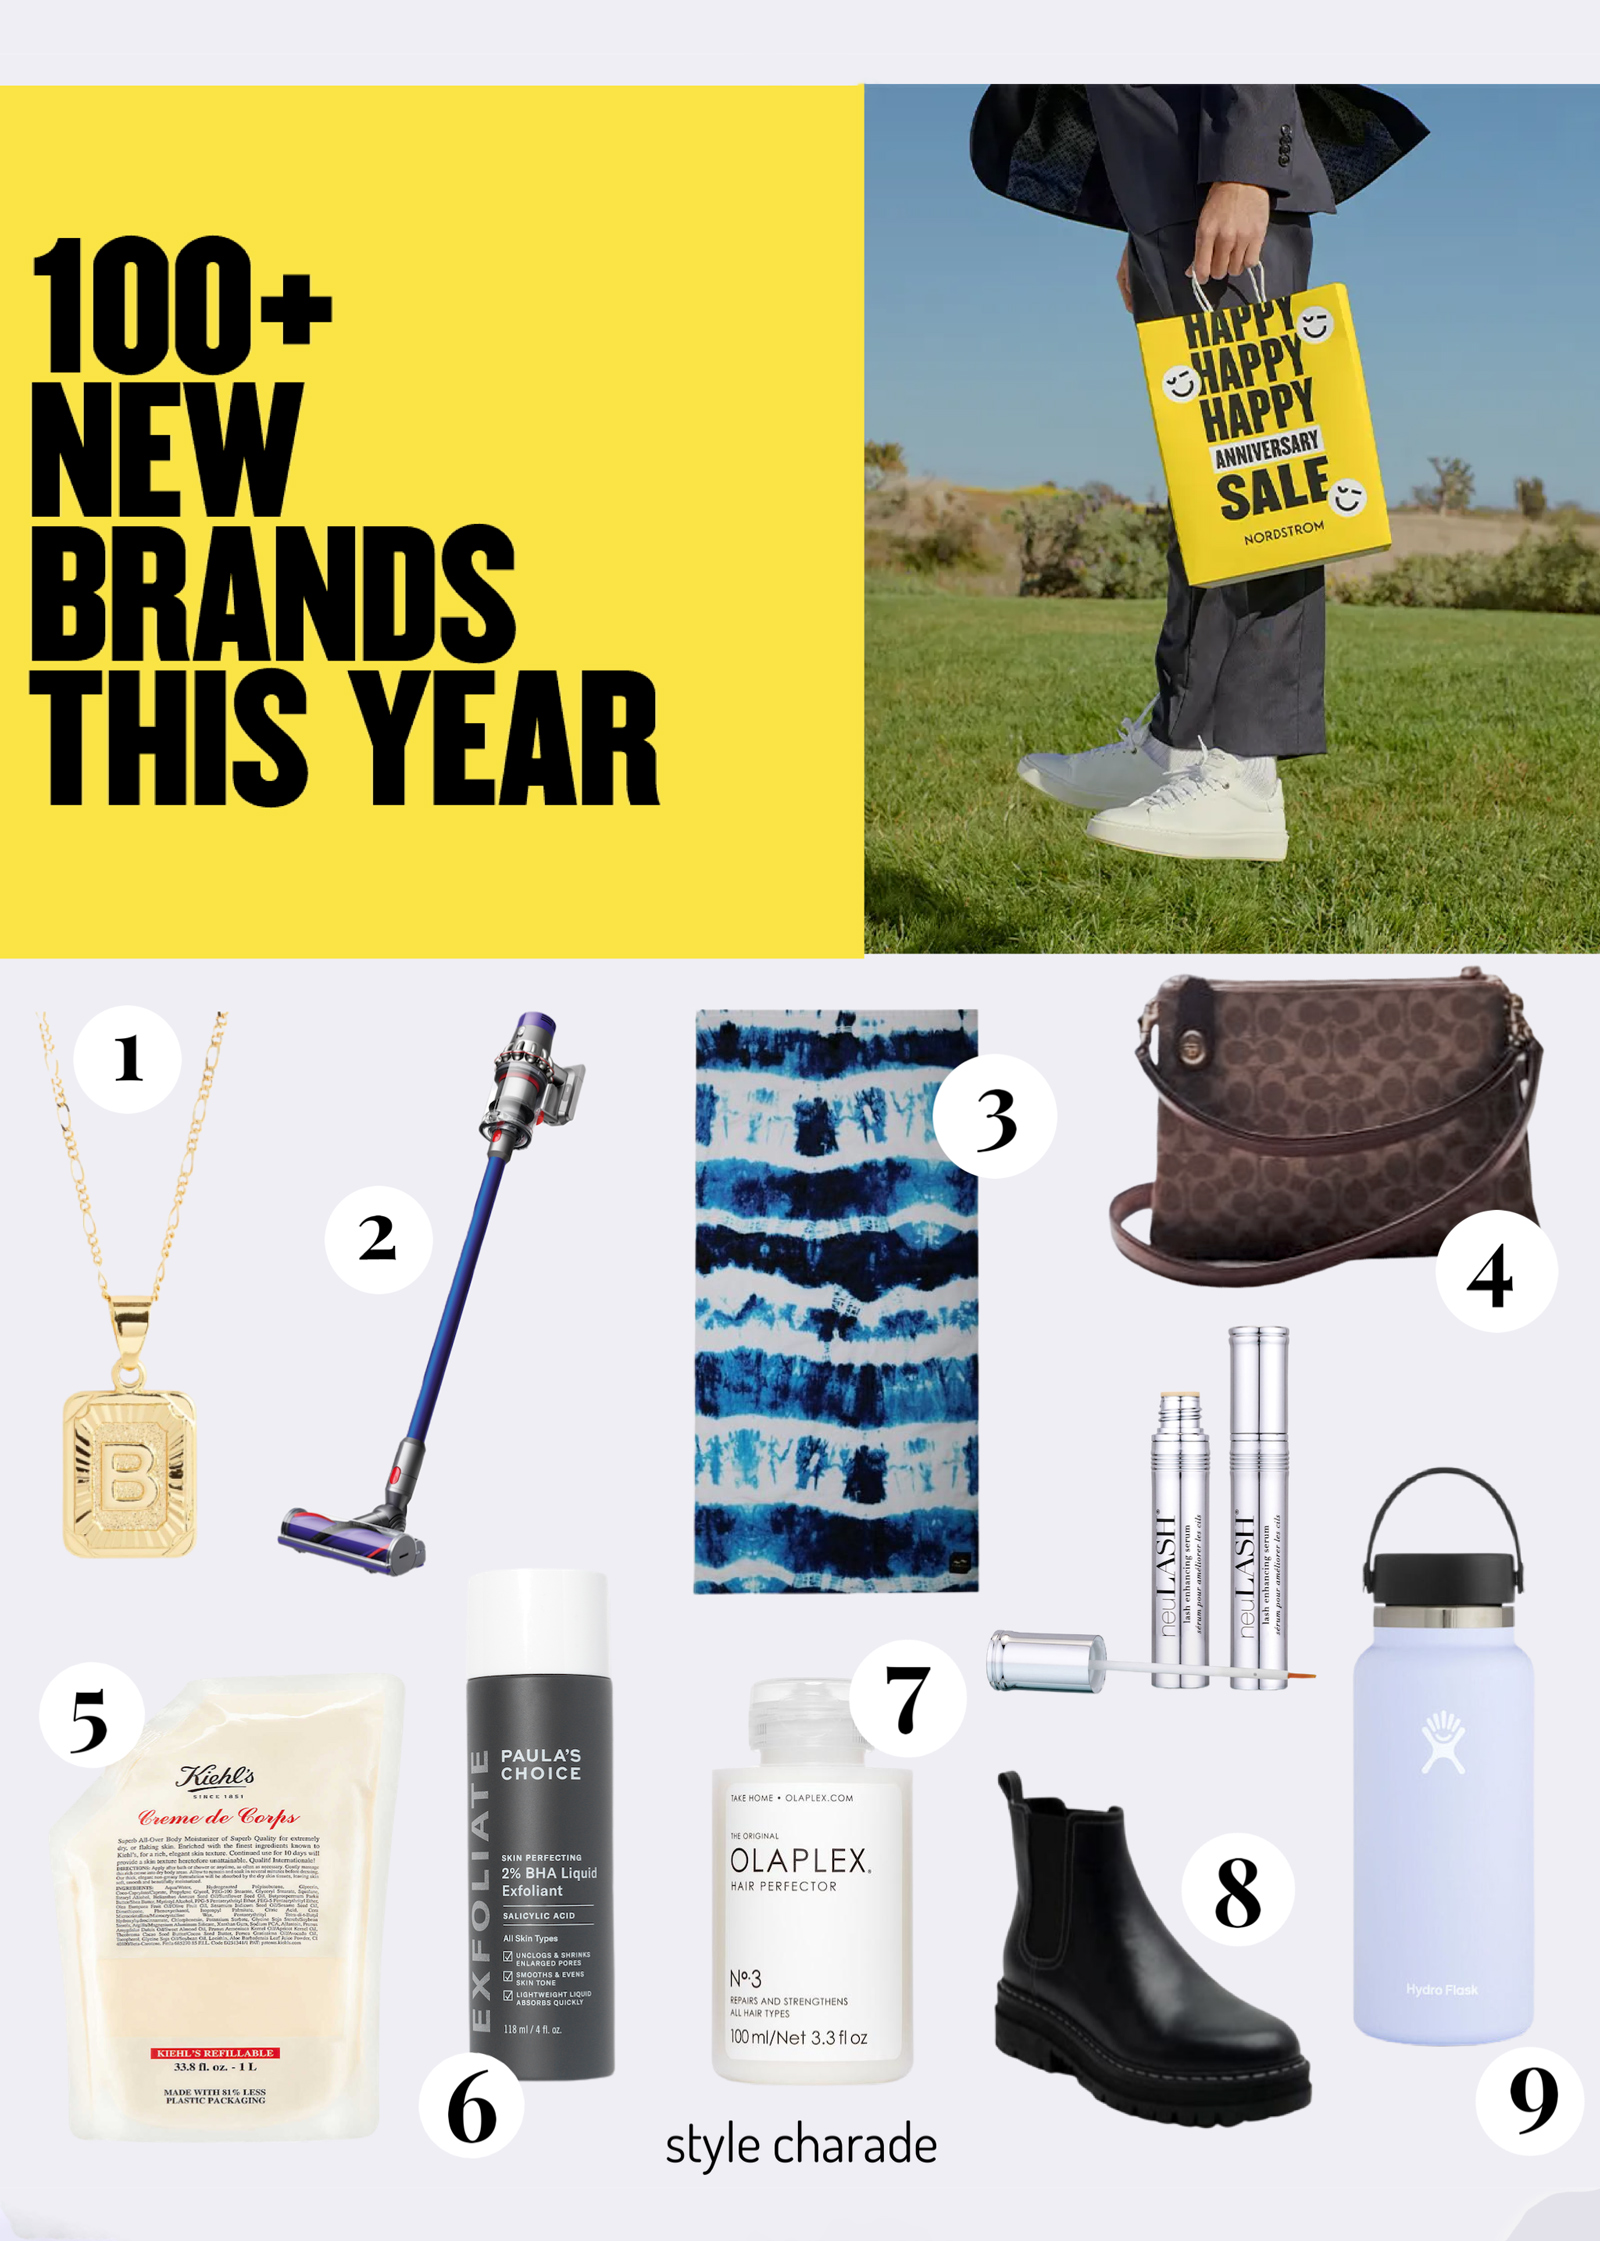 Nordstrom Anniversary Sale Early Access 2021 Store Photos + More